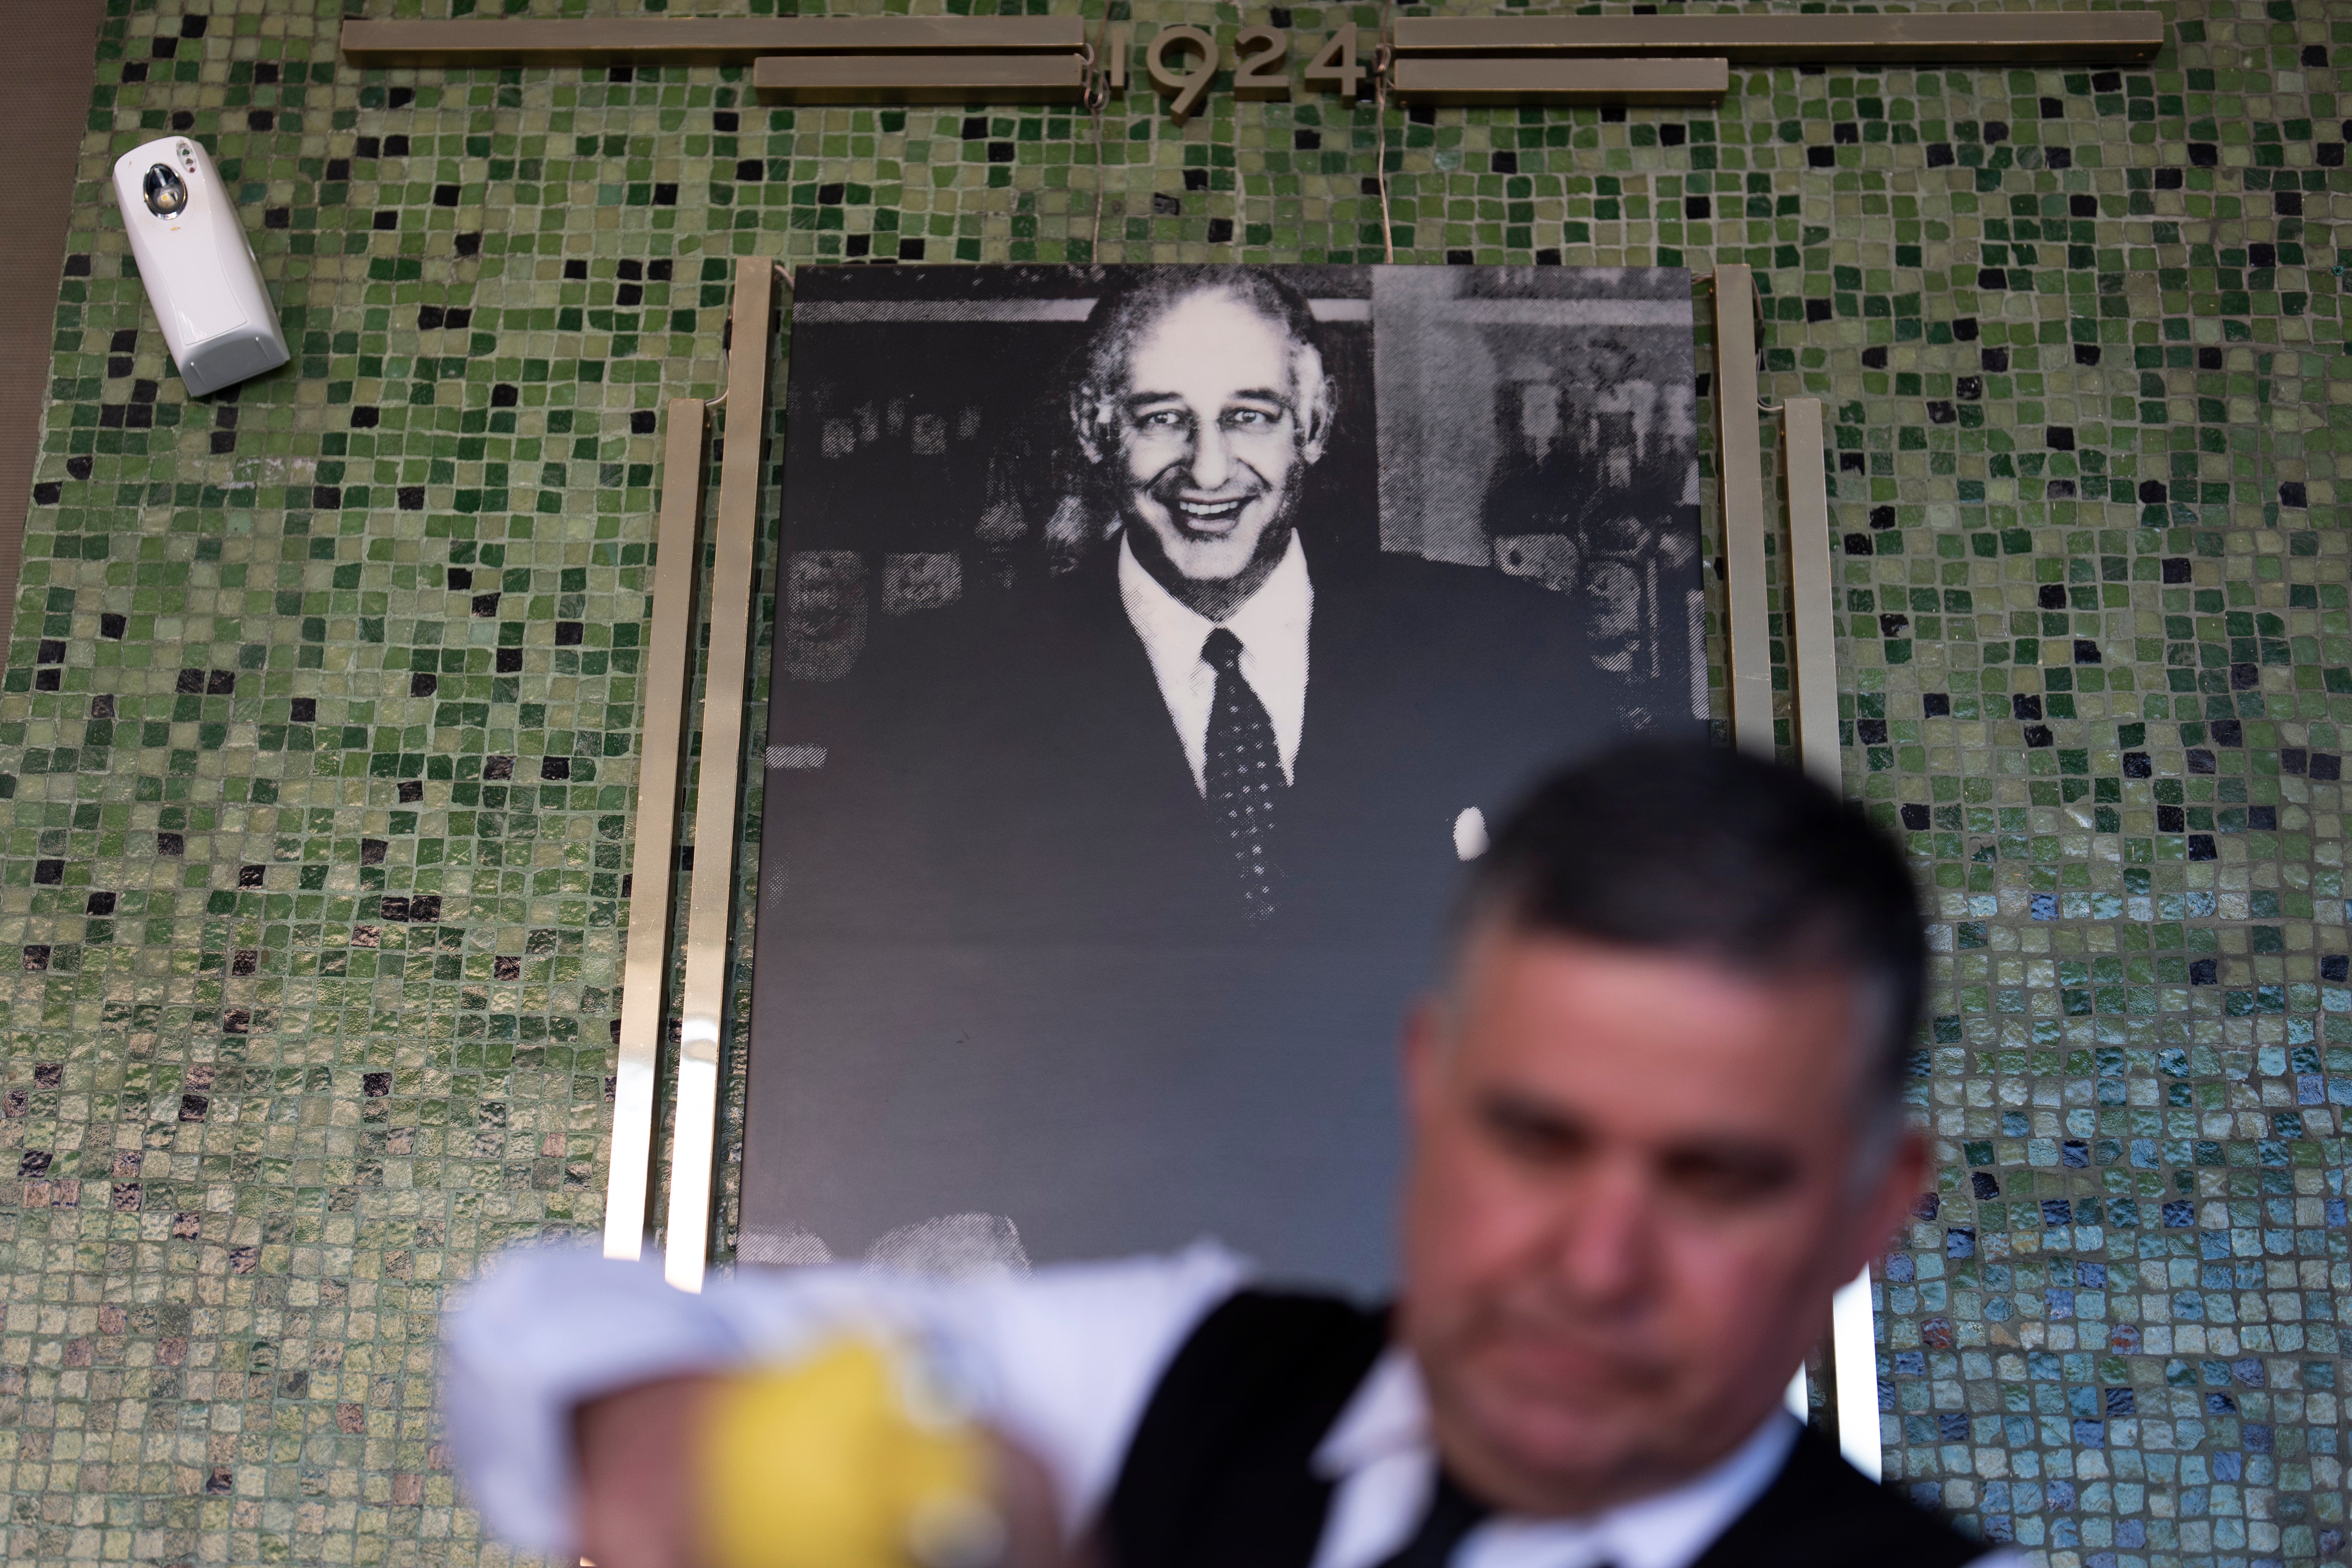 Salad Master Efrain Montoya prepares a Caesar salad in front of an image of the said inventor of the salad, Caesar Cardini